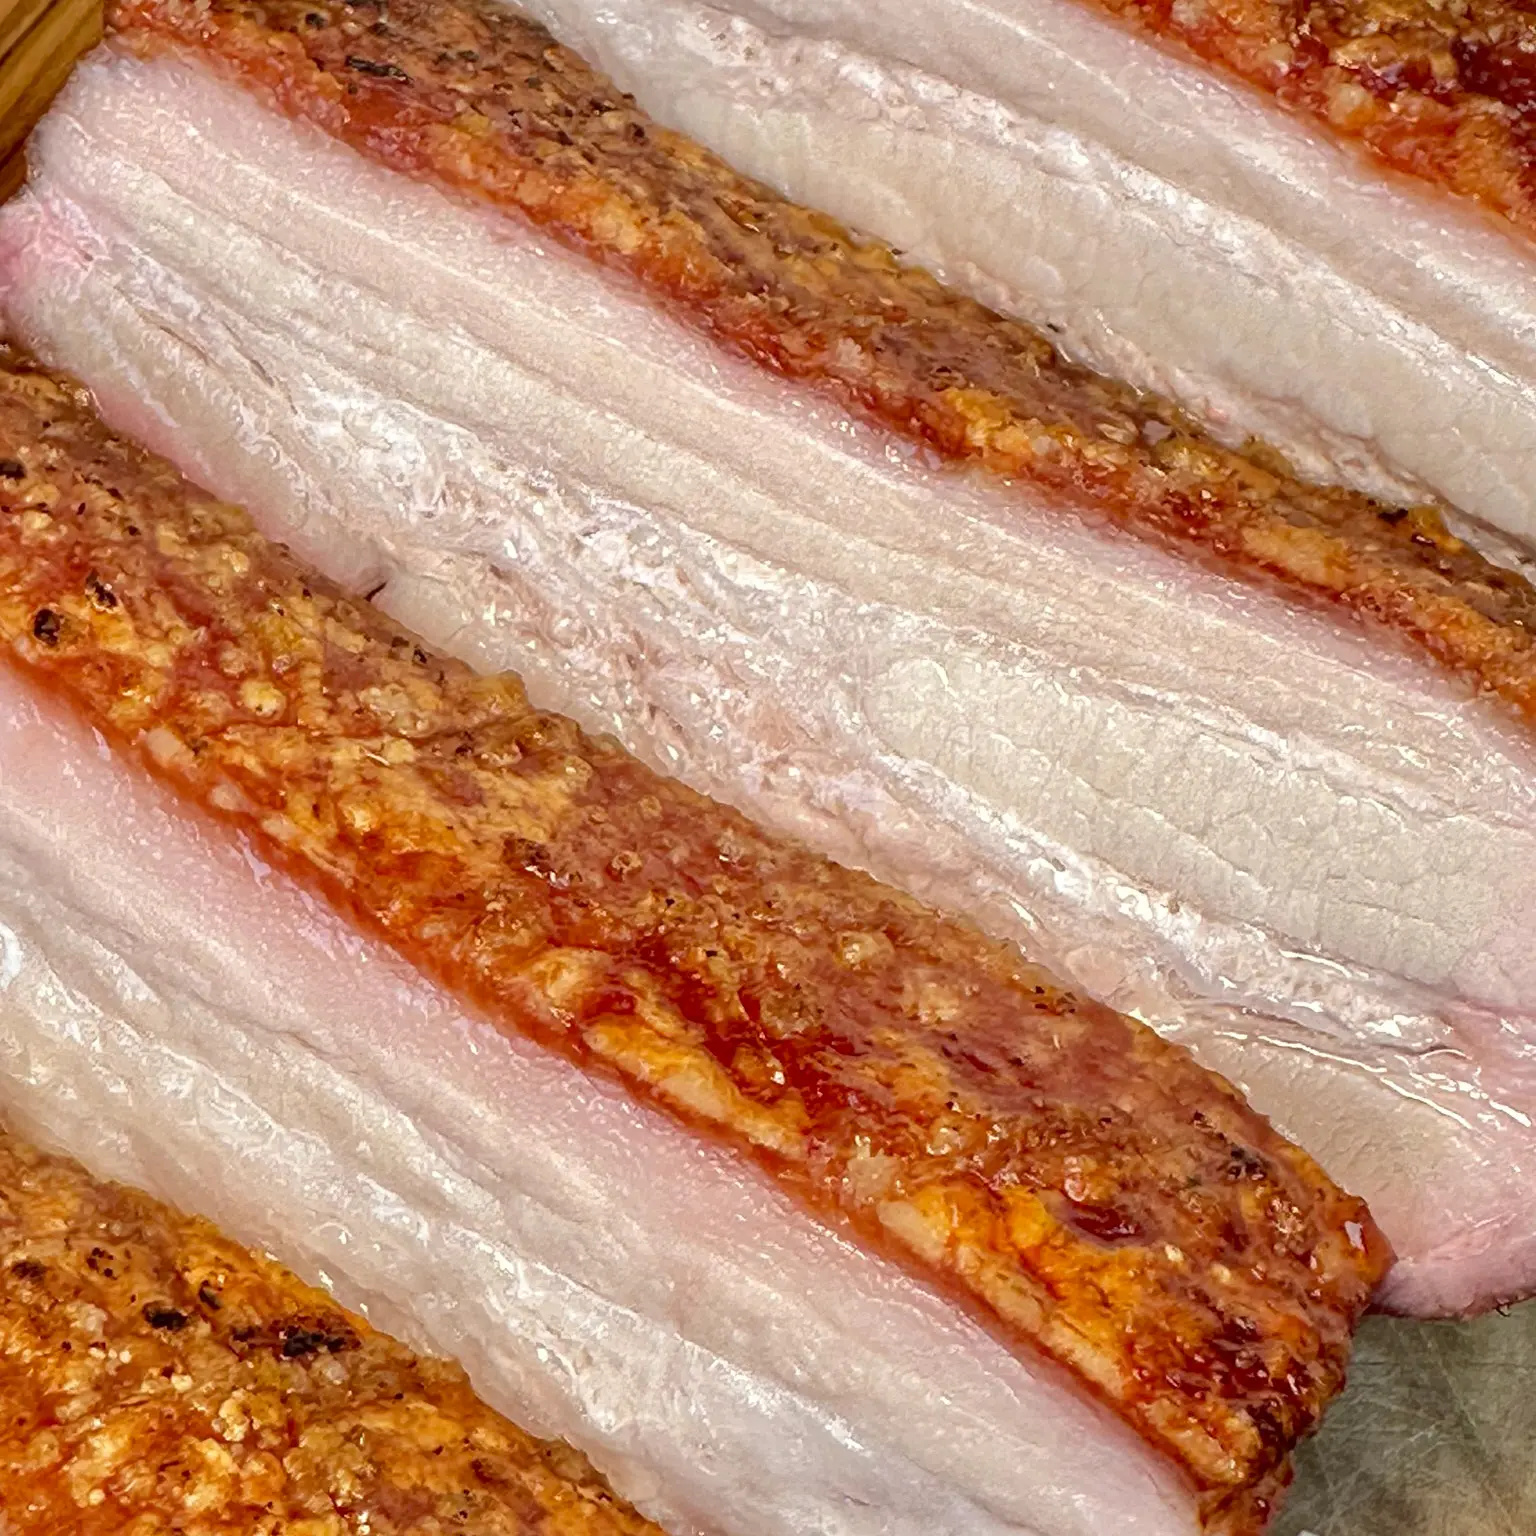 smoked pork crackling - How to get really crispy crackling on pork joint